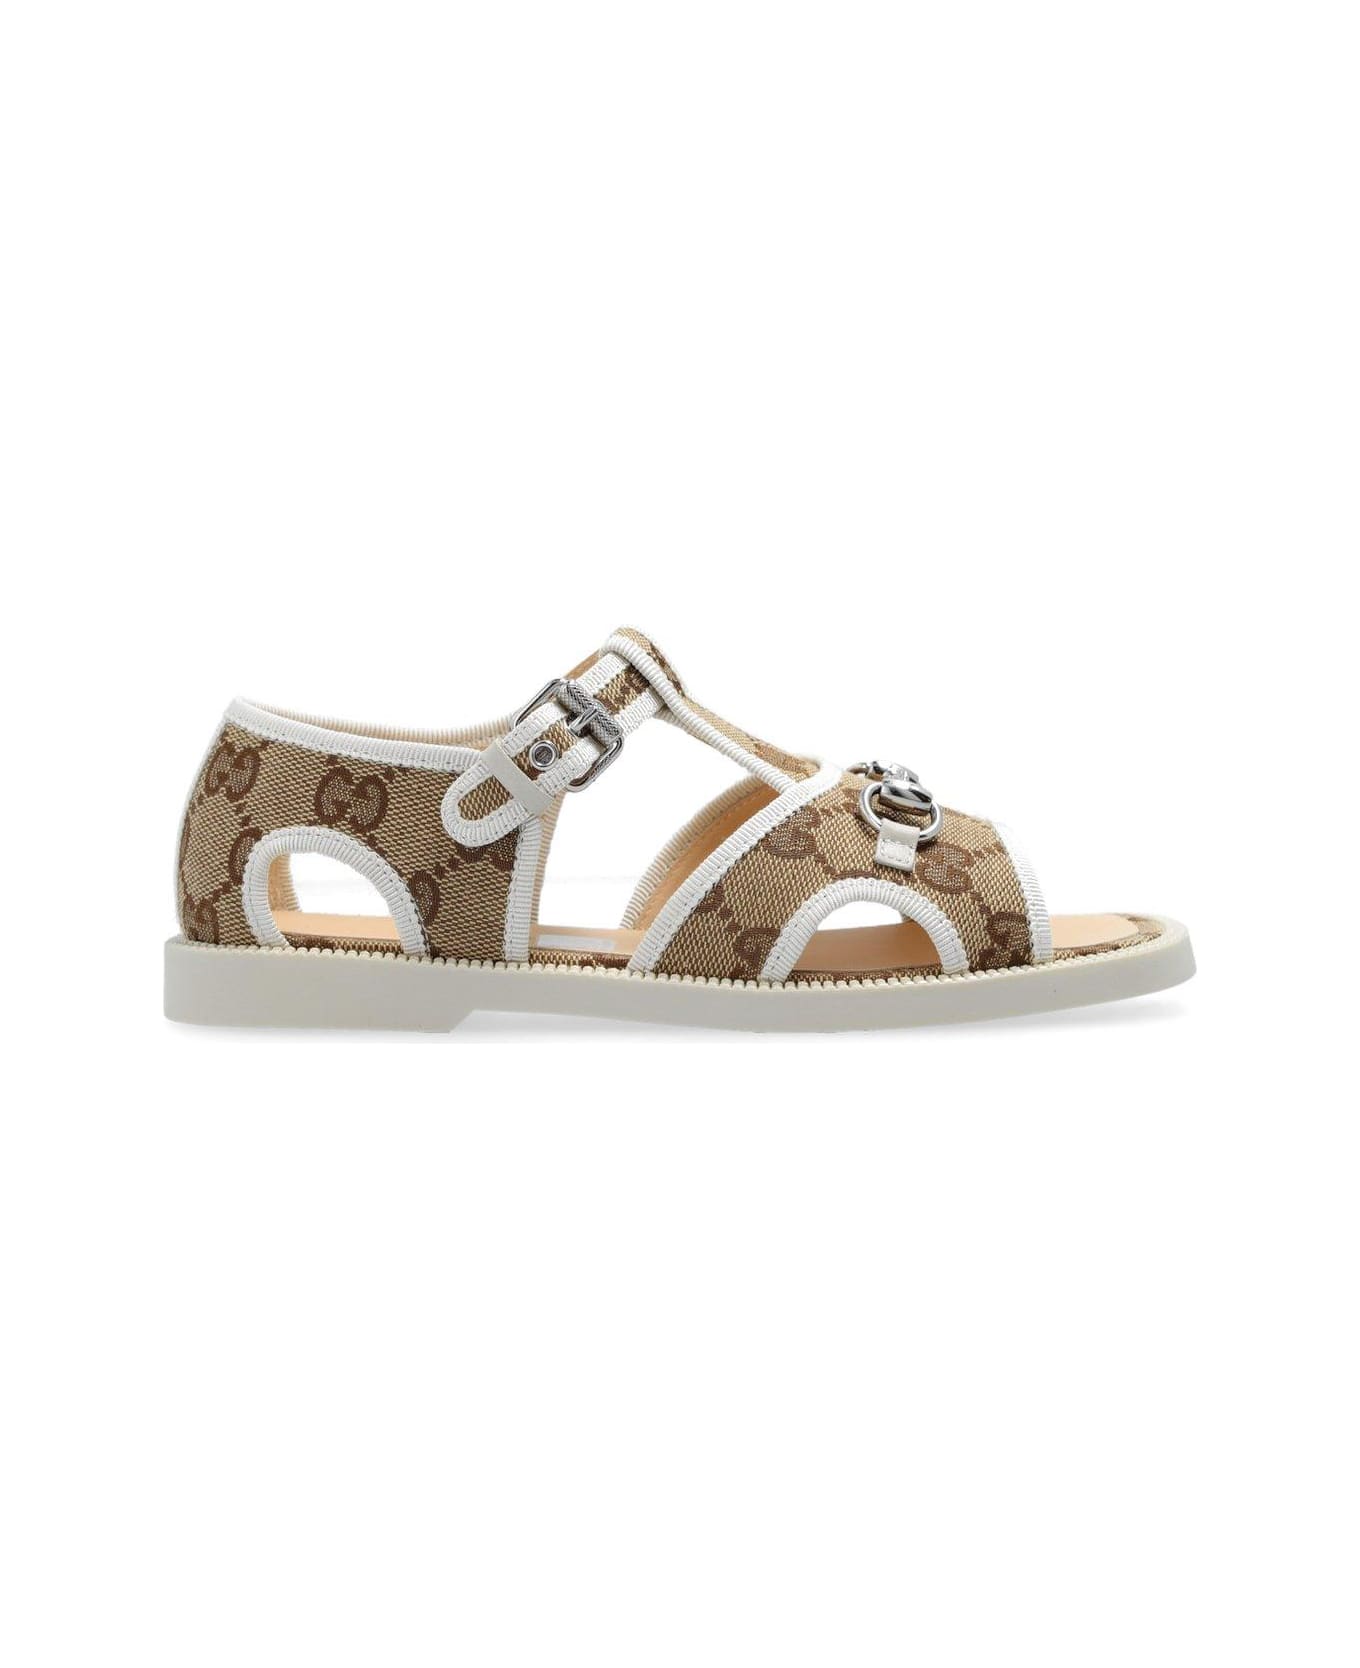 Gucci Buckled Open Toe Sandals - White シューズ